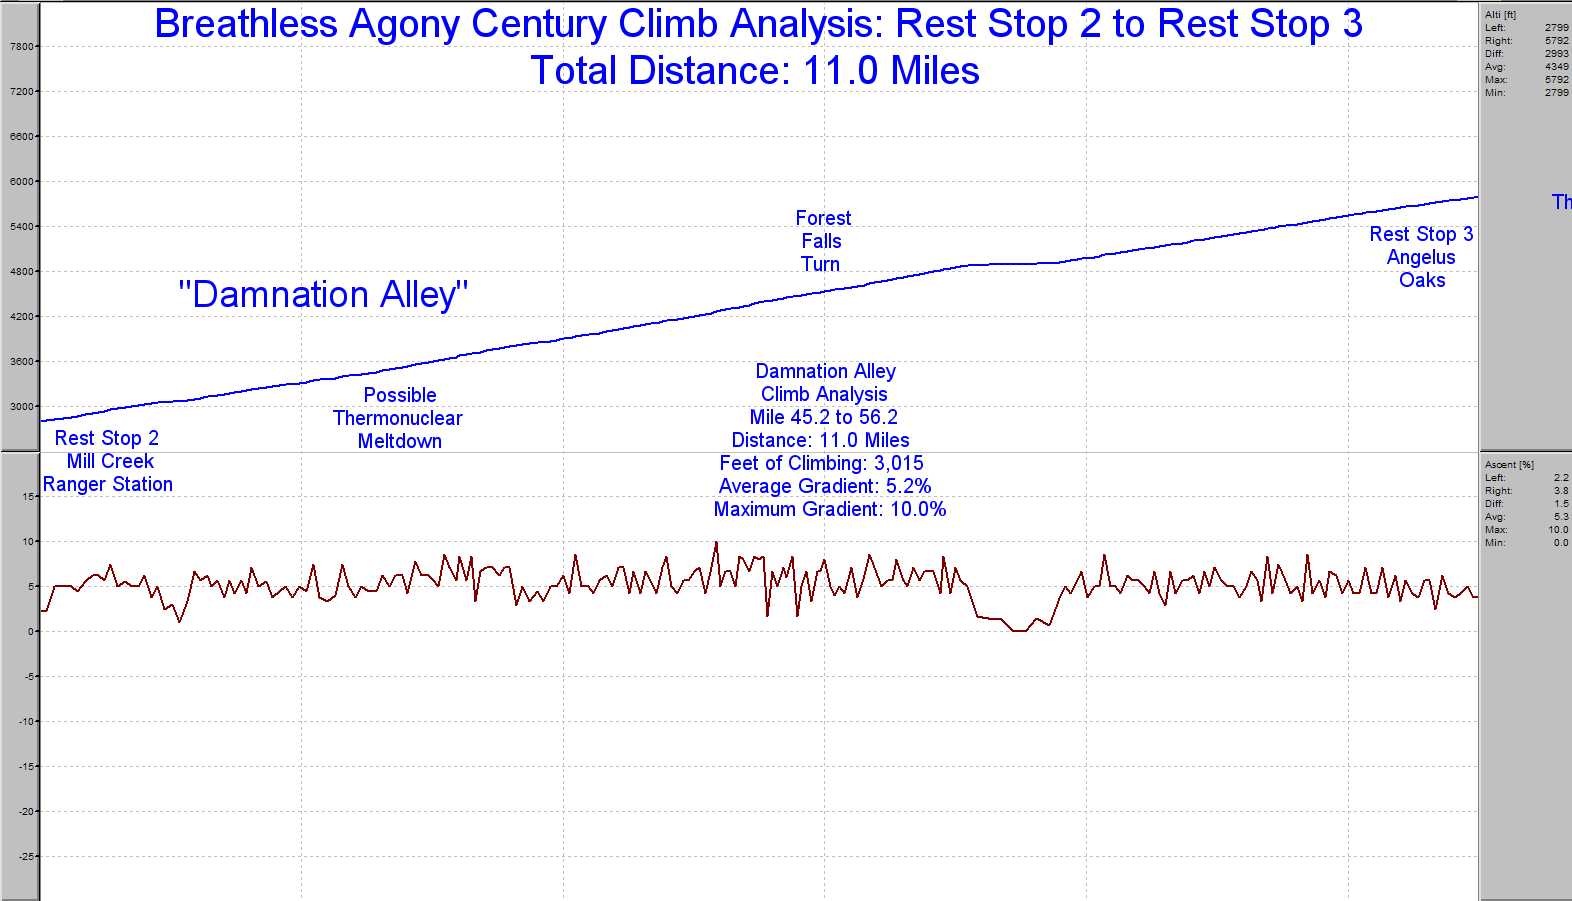 Elevation Profile for Rest Stop 2 to Rest Stop 3